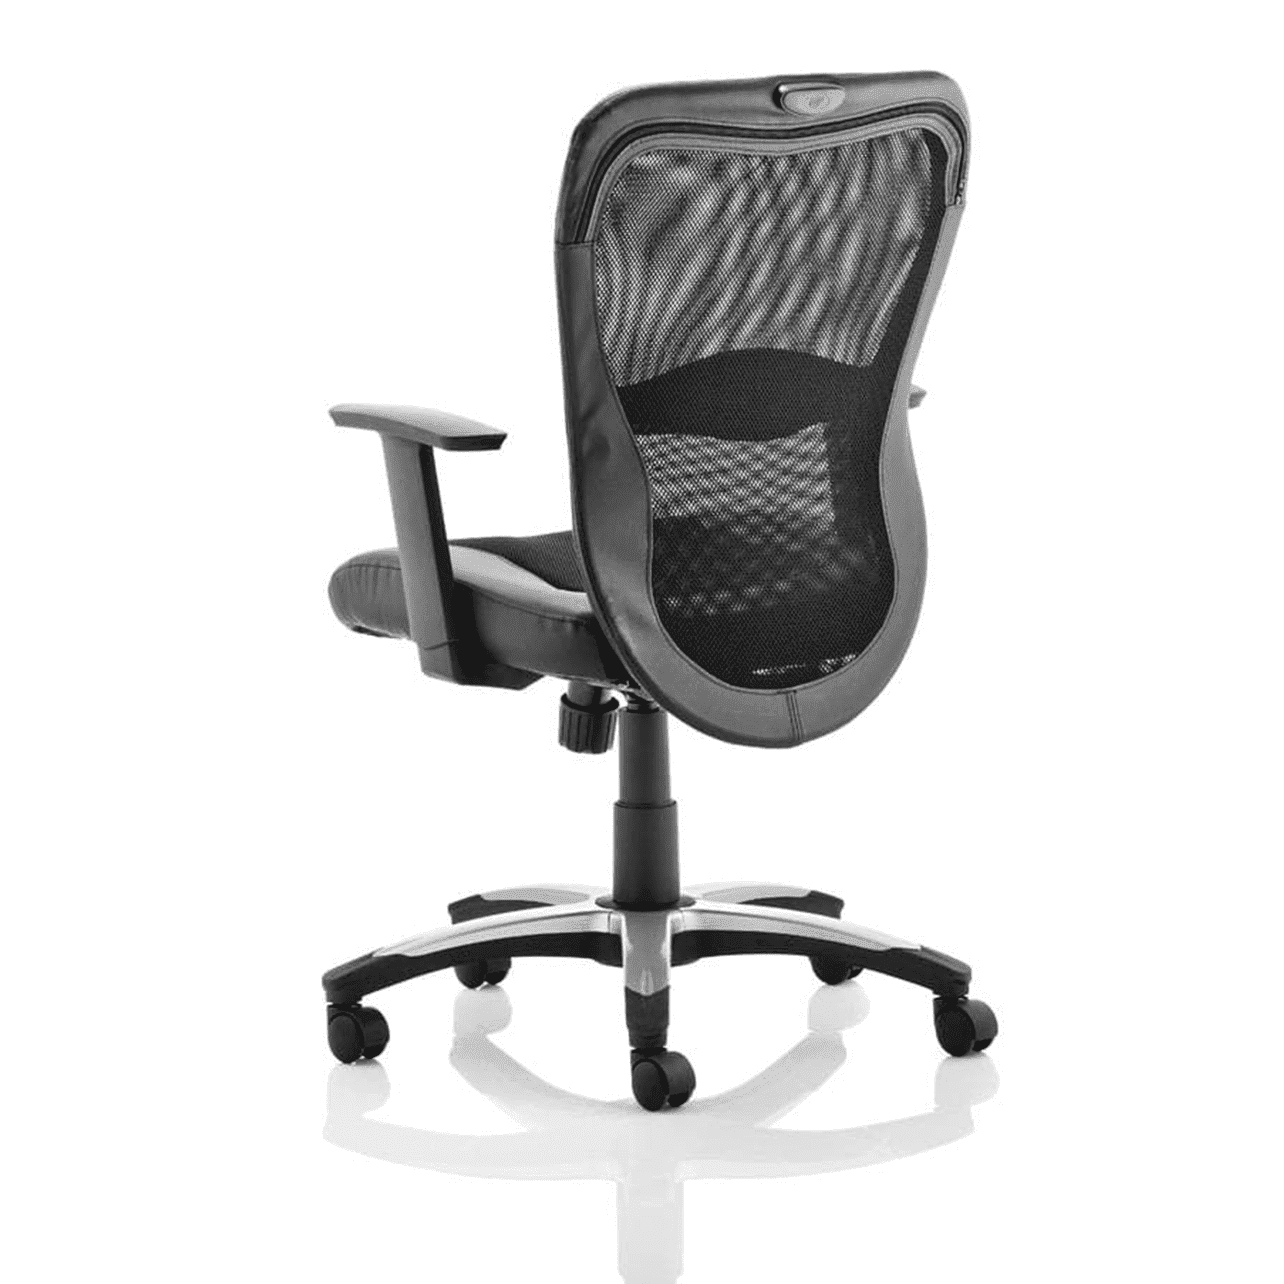 Victor II Mesh Back Executive Office Chair - Adjustable Arms, Lumbar Support, Headrest, 110kg Capacity, 8hr Usage - Flat Packed (94013000)